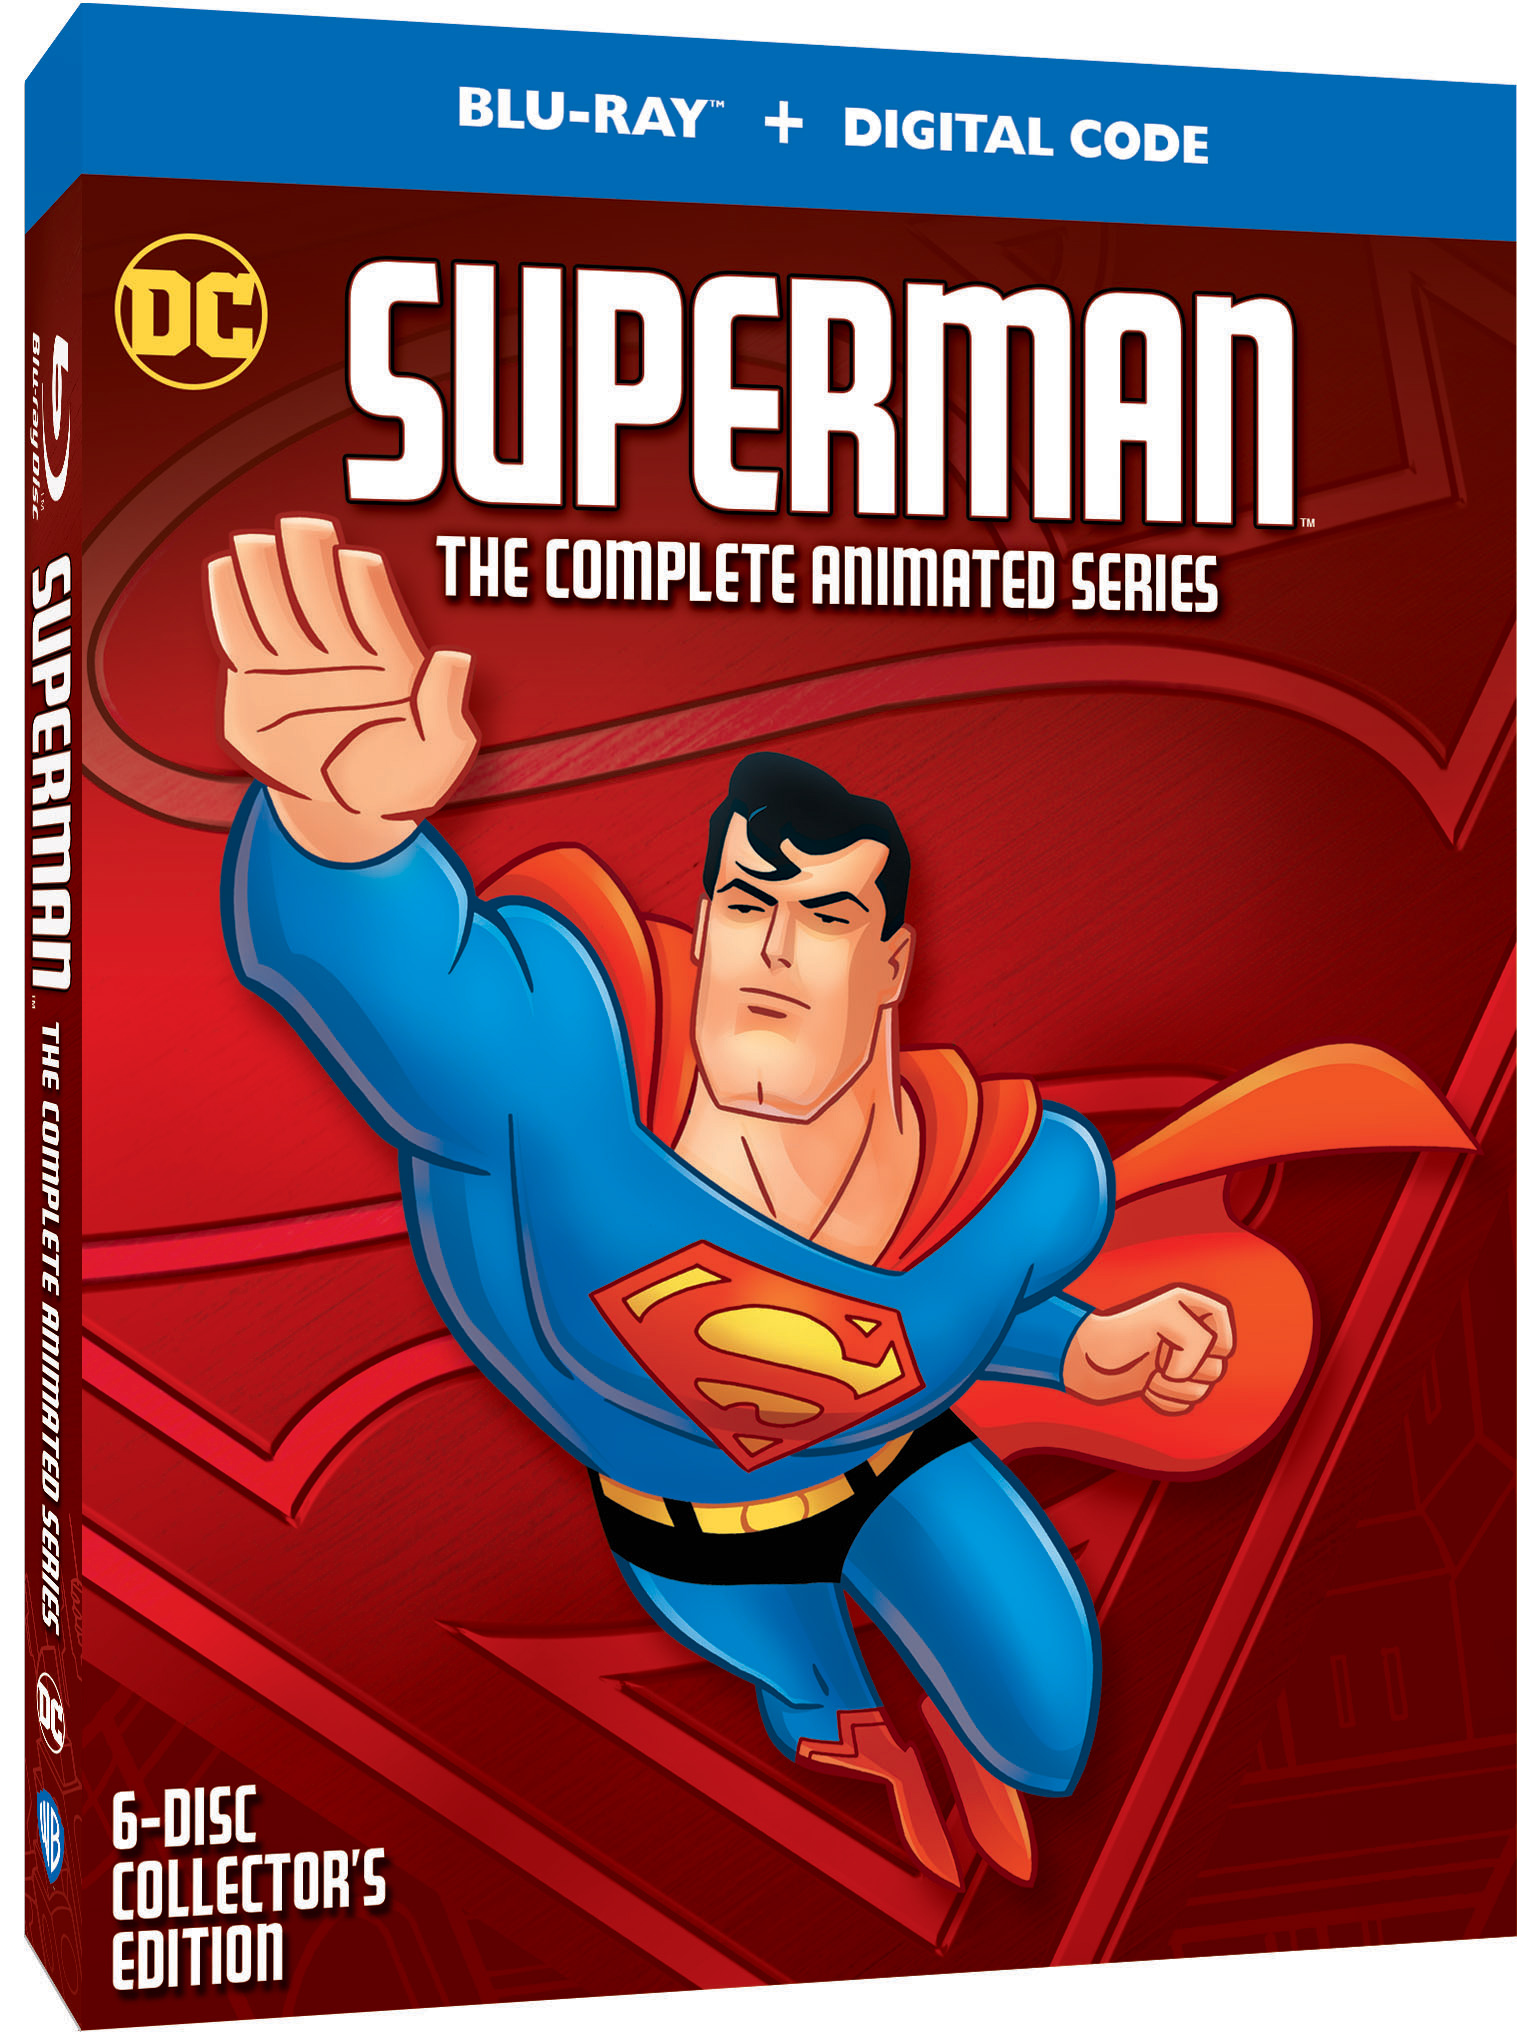 Blu-ray Review: Superman: The Complete Animated Series | KryptonSite